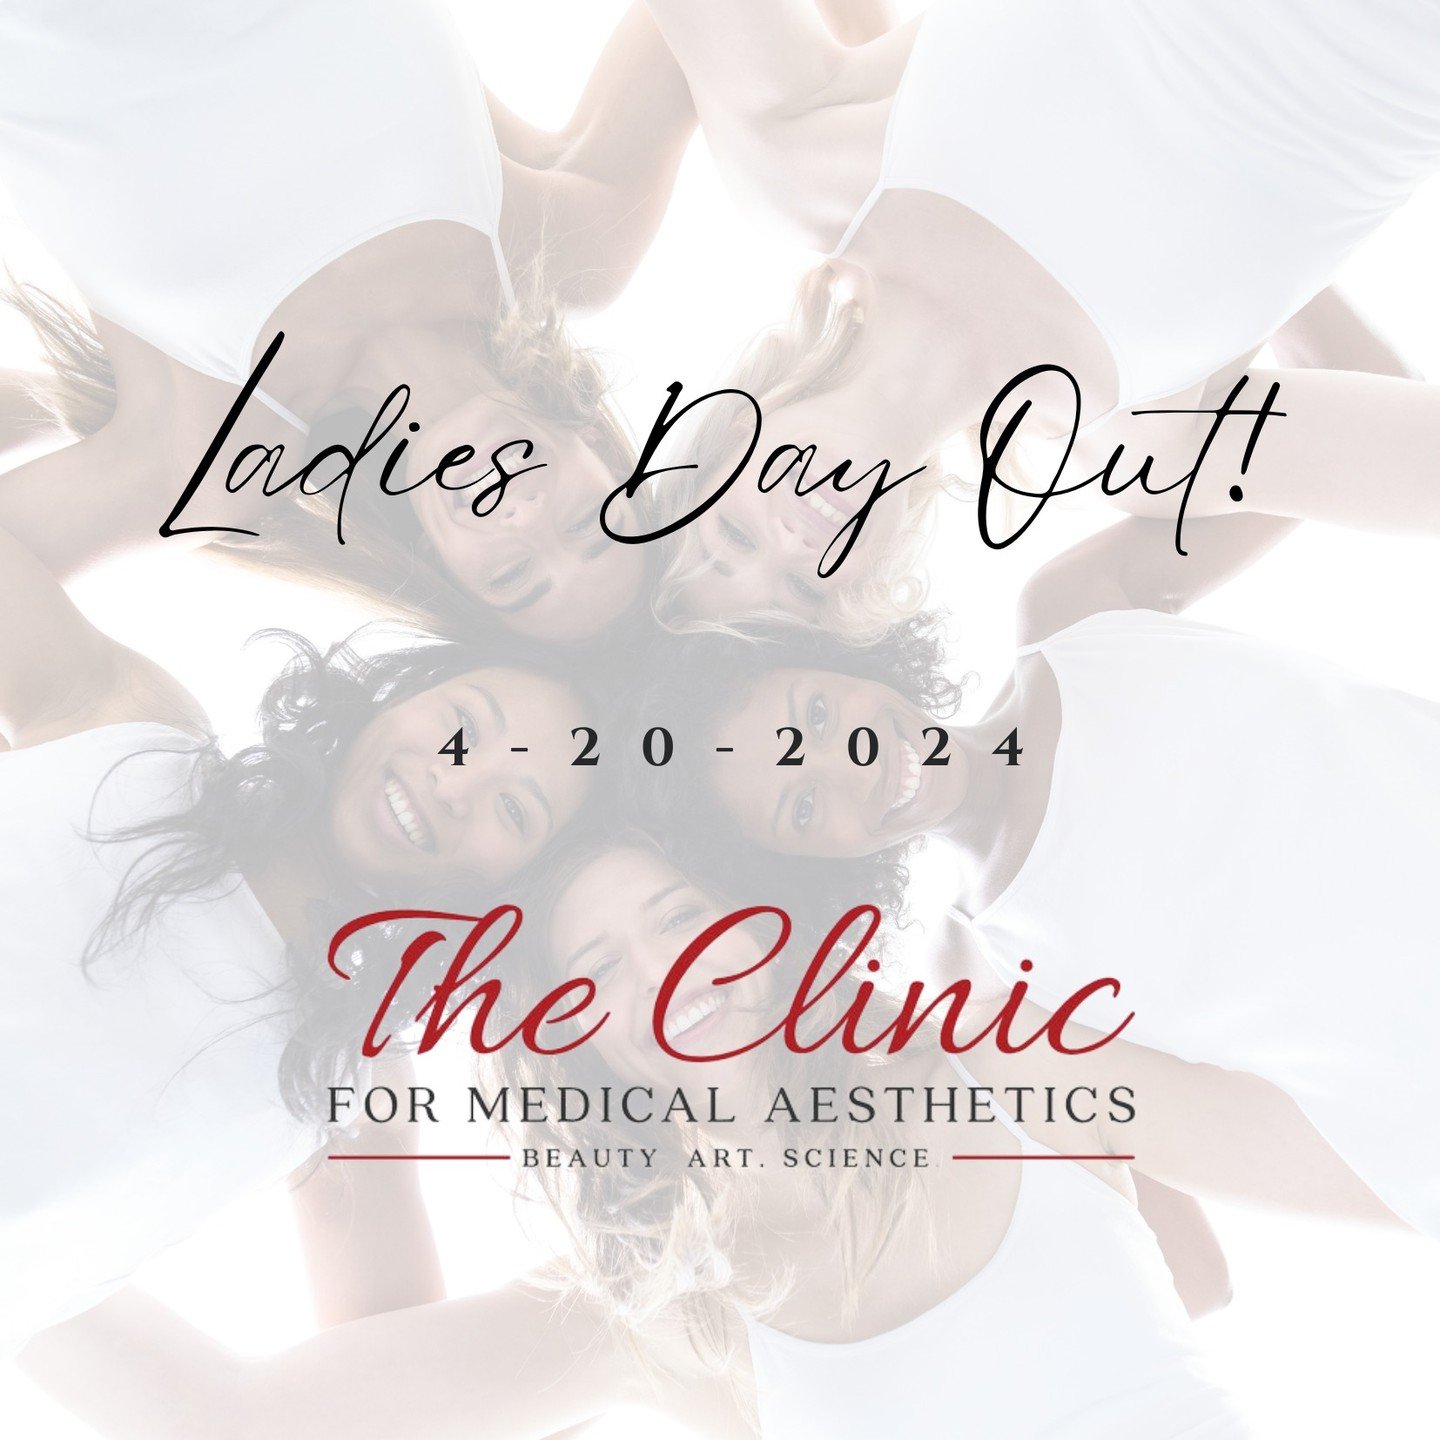 Join us for Ladies Day Out at our Buffalo Clinic on Saturday April 20th 10 am to 4 pm. 
1 day only specials!!
-Dysport/Botox $10/Unit
-Brow Lamination $99
-All retail 20% off
--Ladies Day GIVEAWAY: Enter to win FREE Dysport for 1 year!!!!--